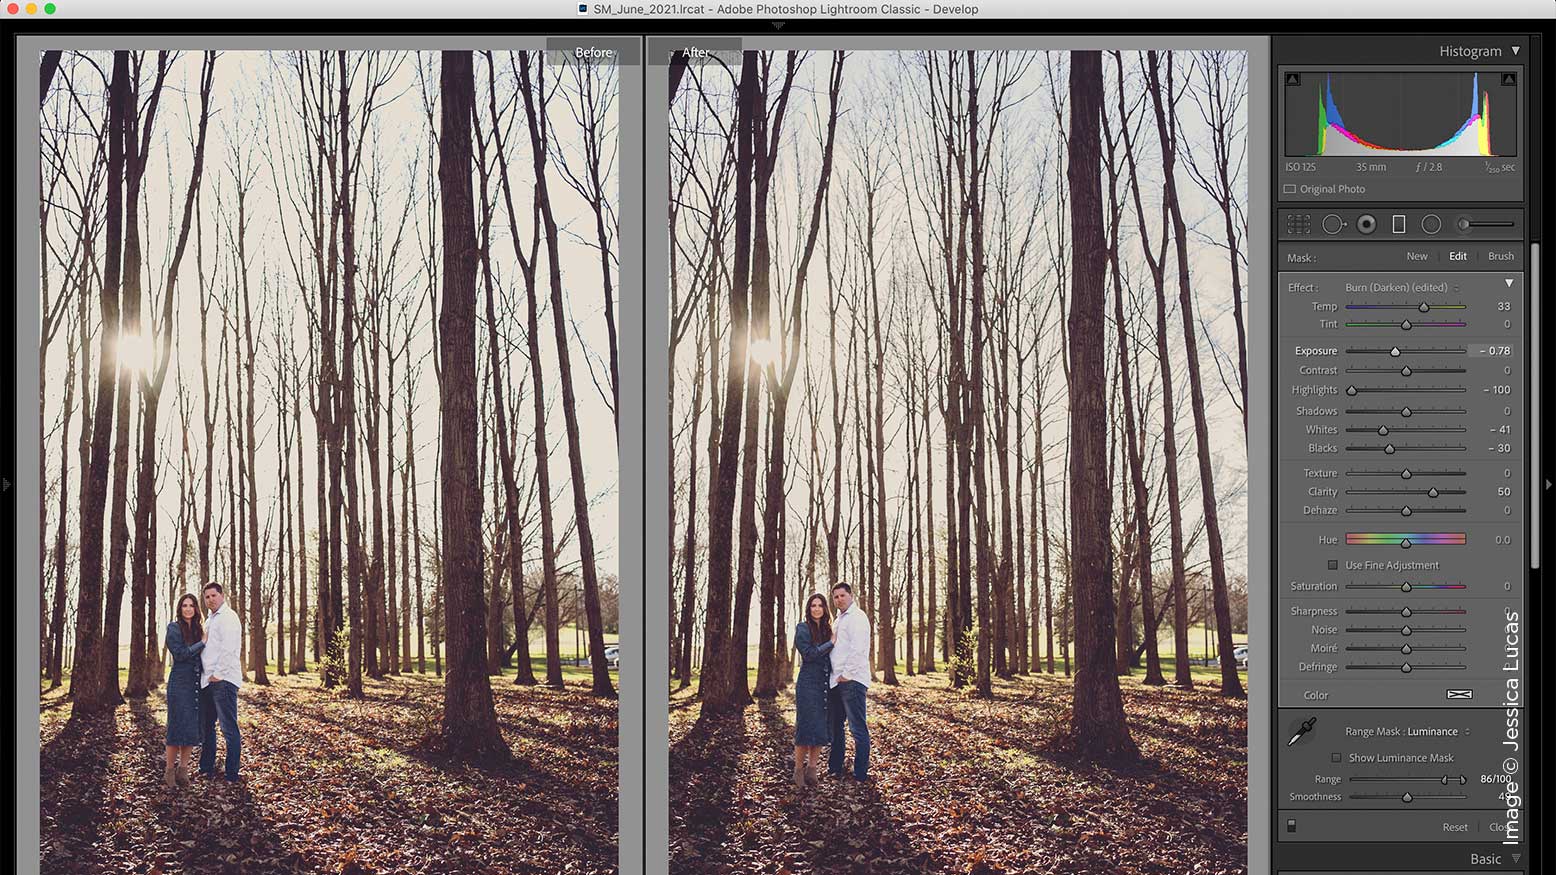 Read more about the article Down & Dirty Creative Editing in Lightroom Classic & Photoshop